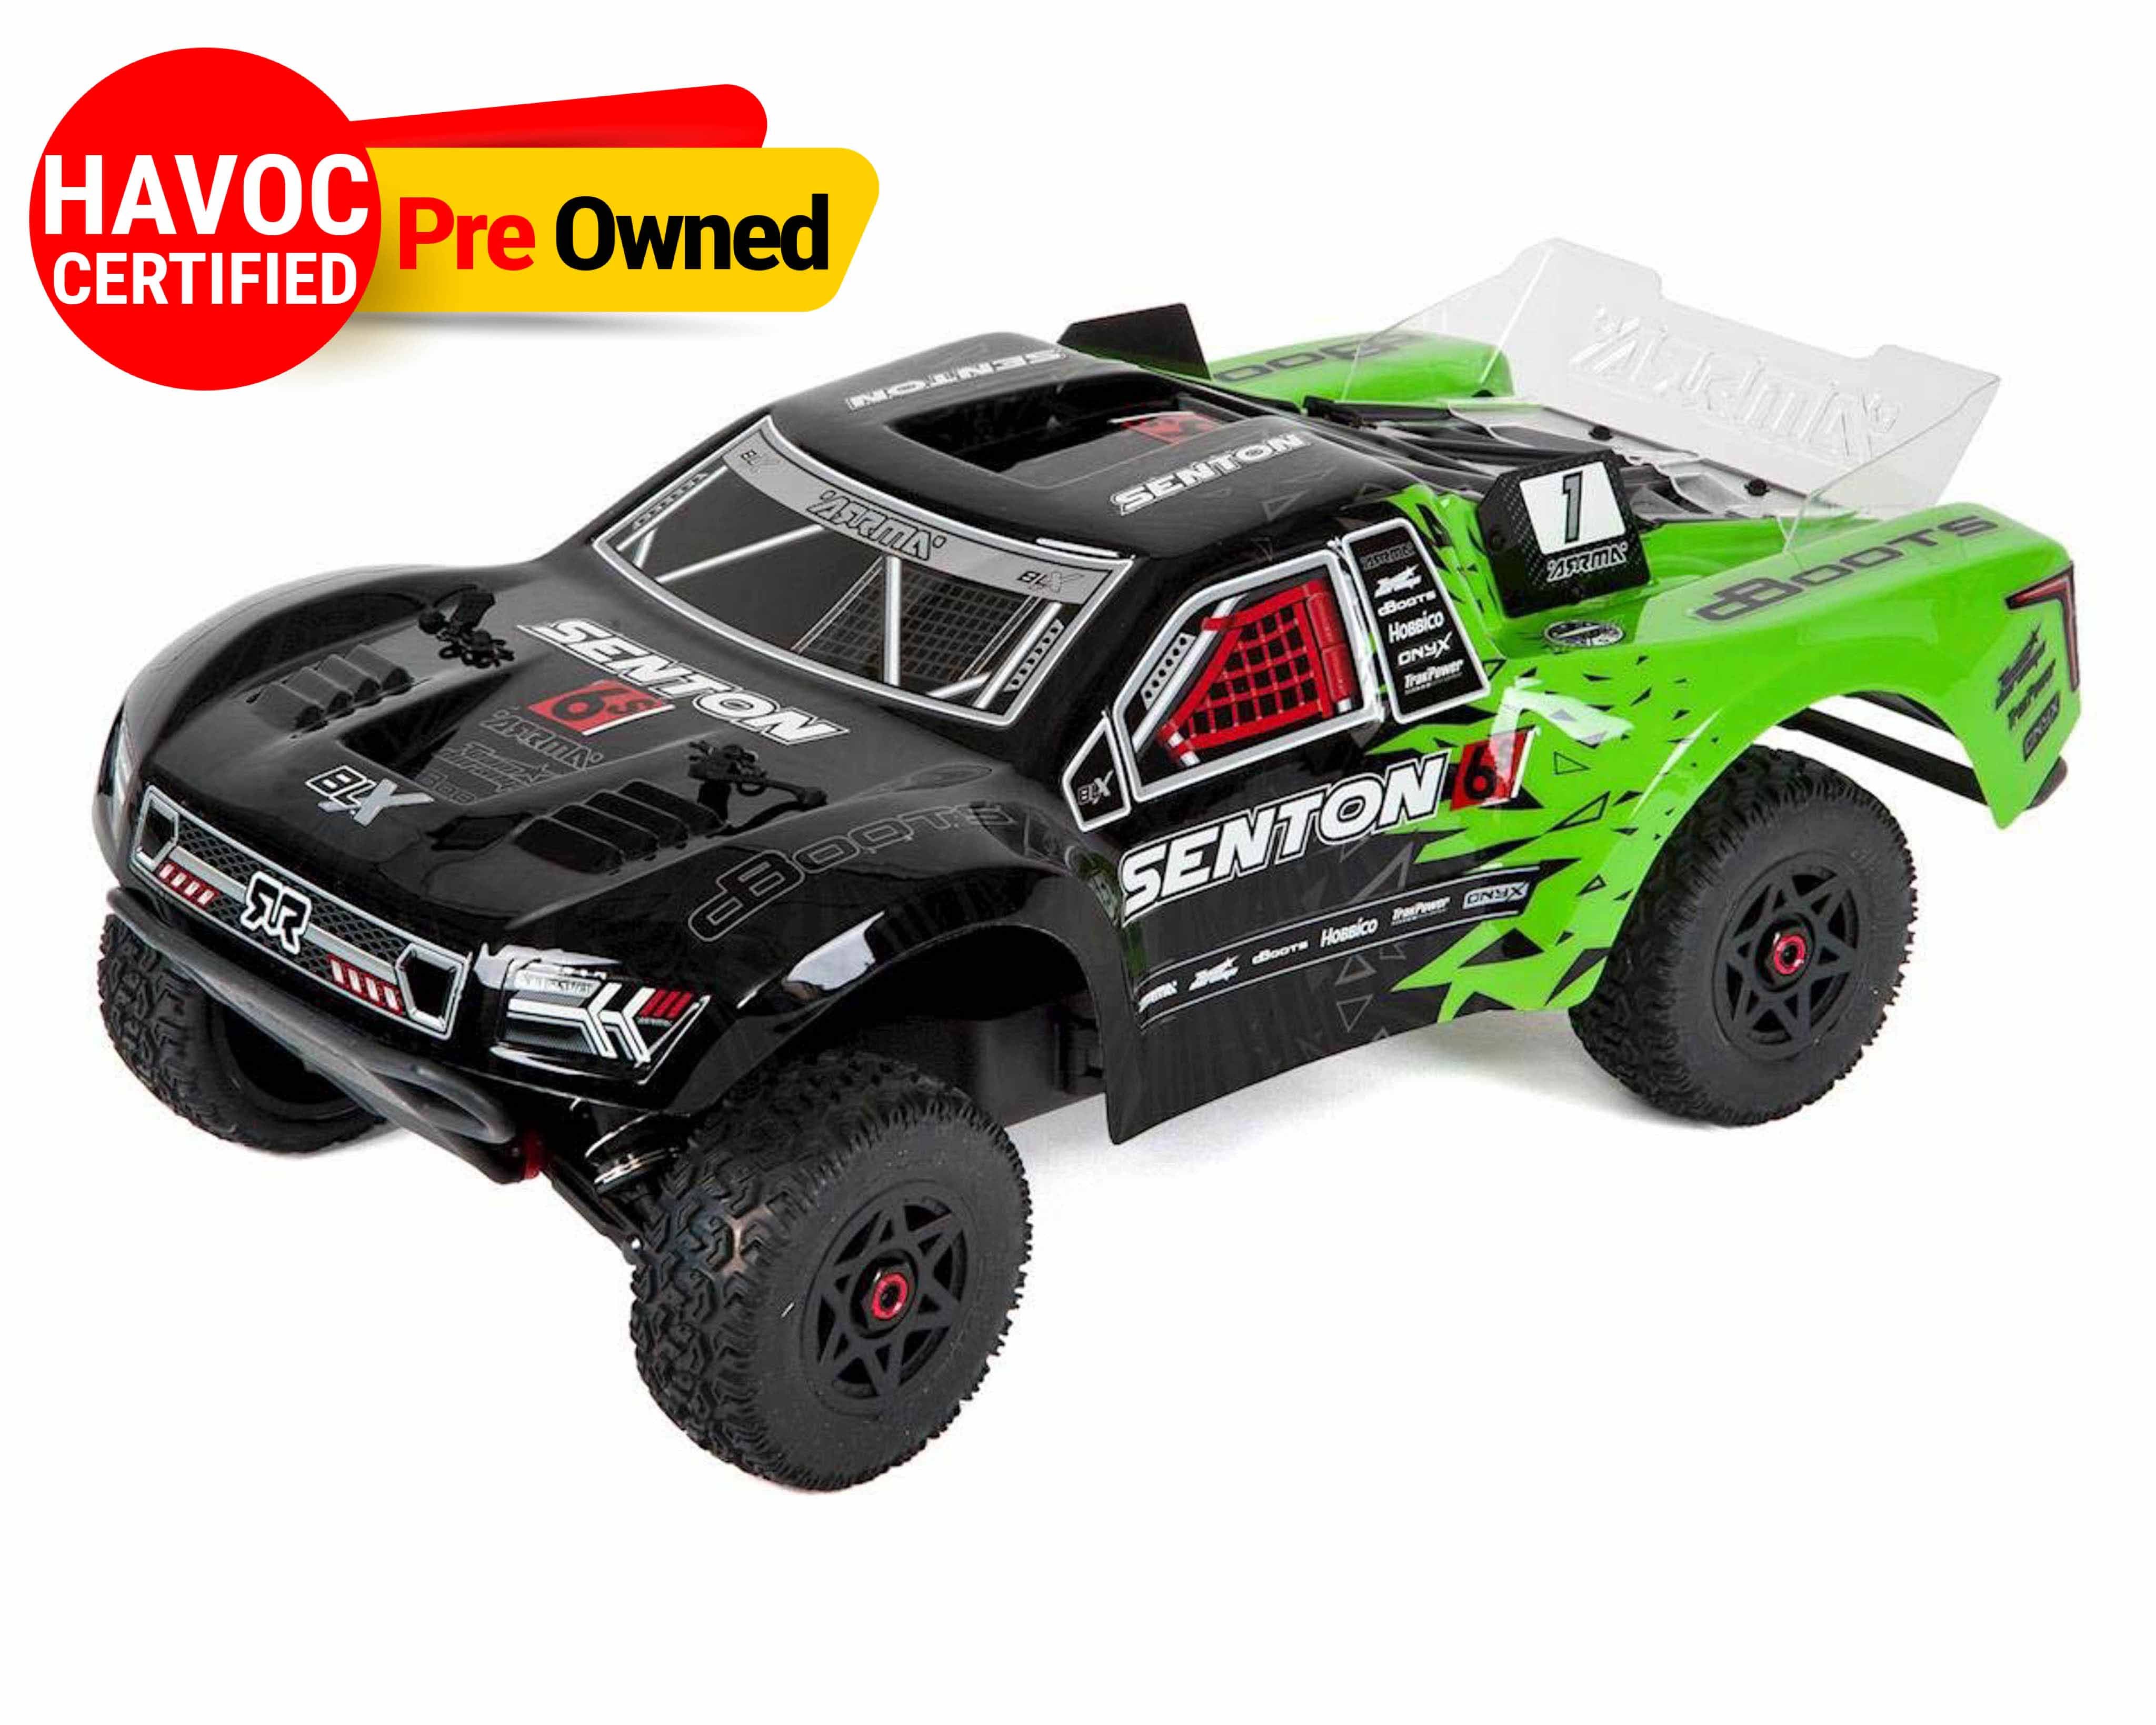 Arrma Senton 6S 1/10Scale 4Wd Green Car (Quality Pre Owned)